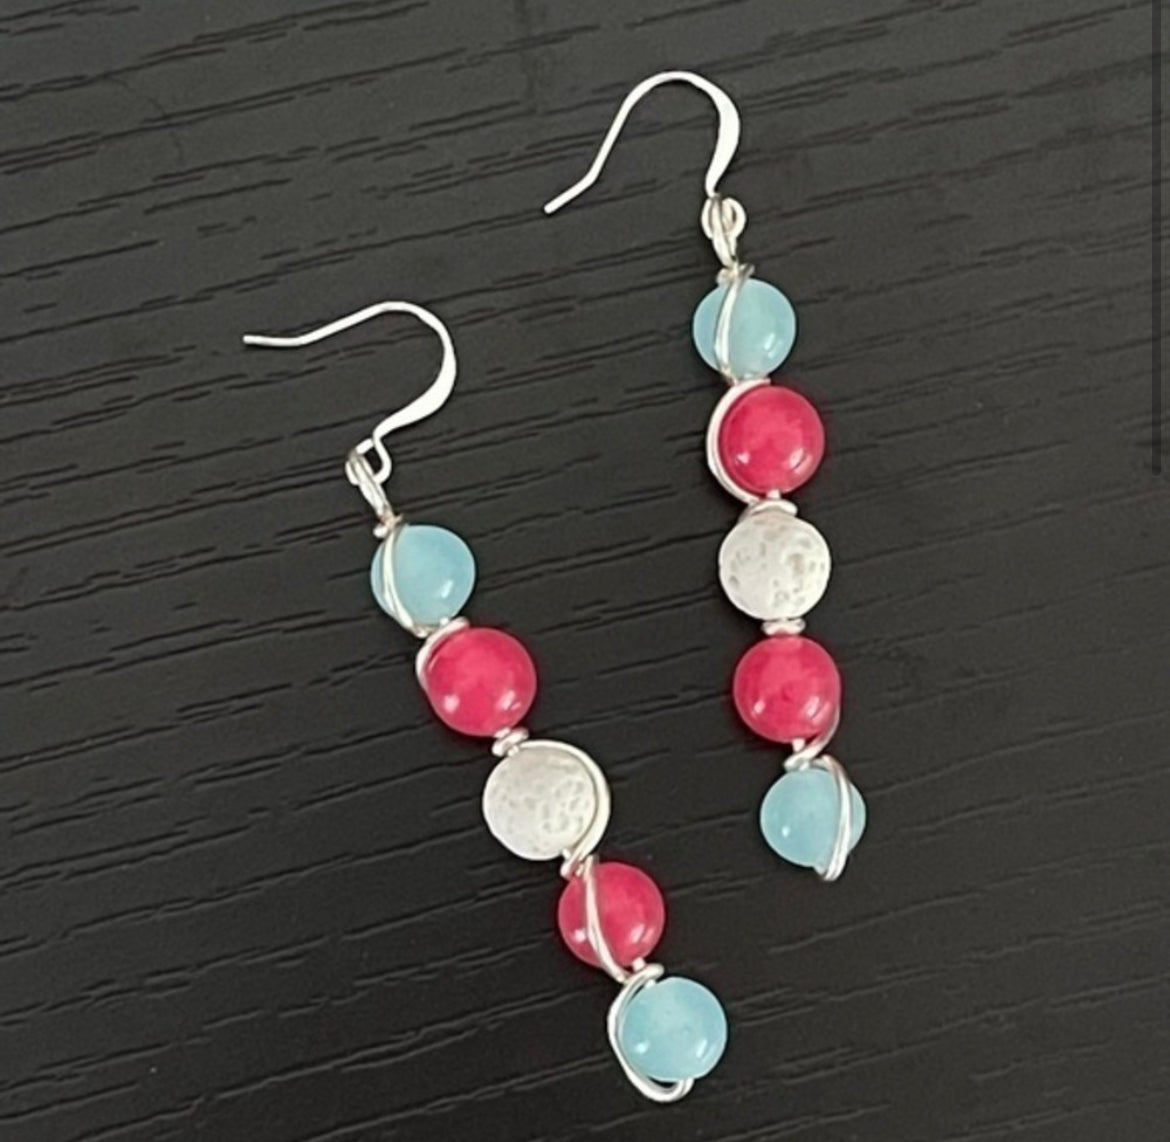 Trans Flag Wire Wrapped Drop Earrings 2.5" Pastel Blue Pink White Lava Stone Pride LGBTQIA Colorful Transgender Ally